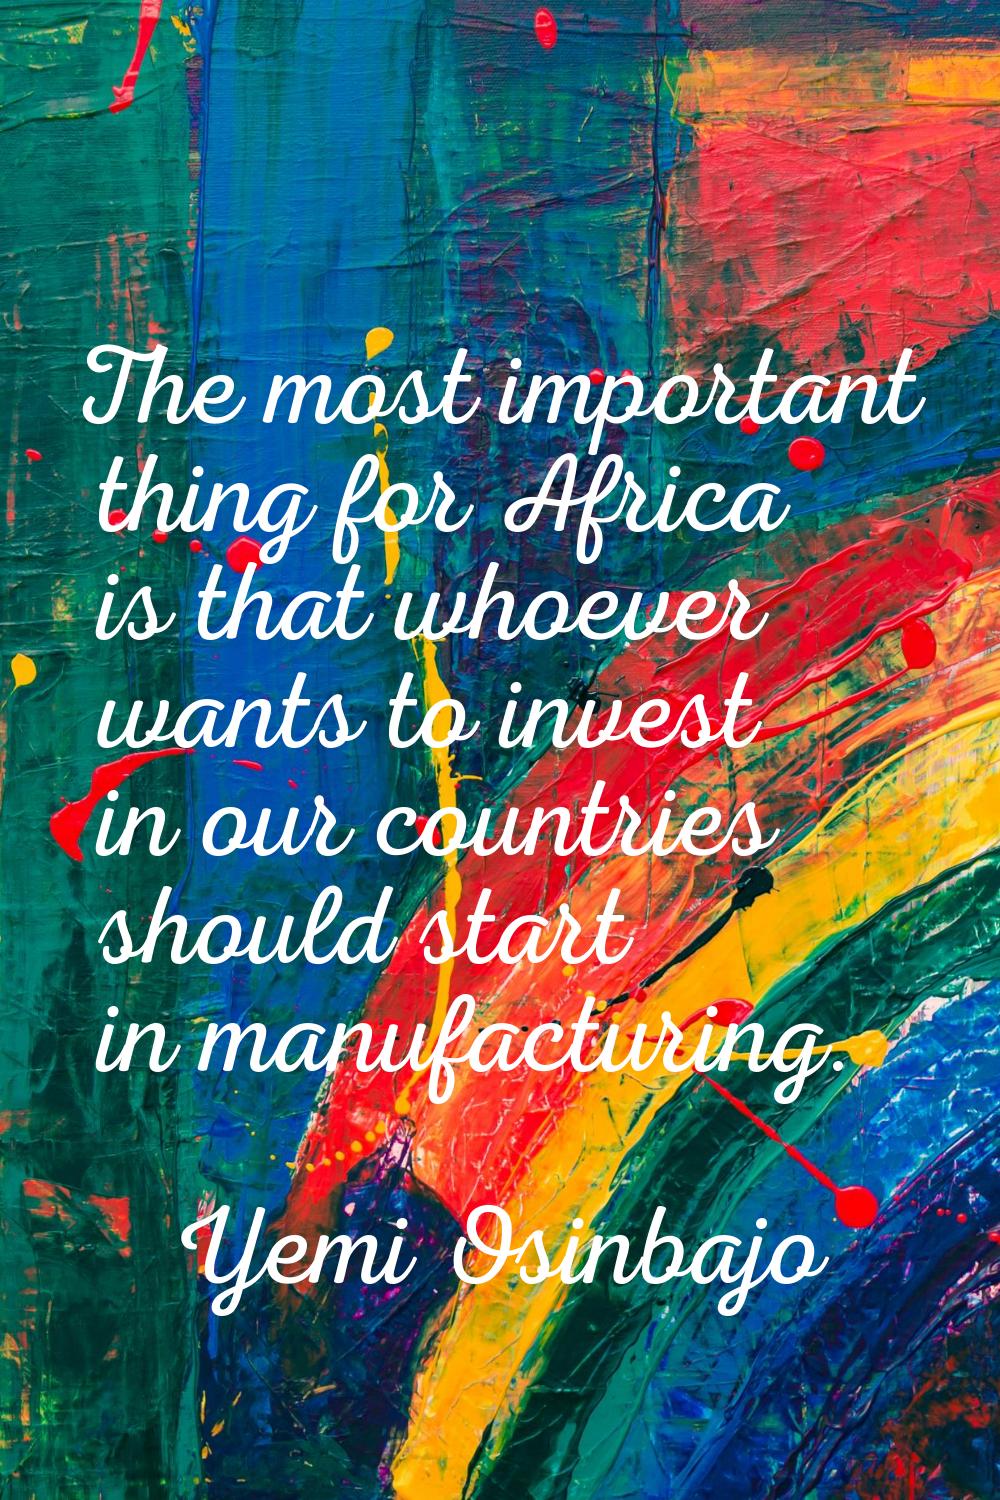 The most important thing for Africa is that whoever wants to invest in our countries should start i